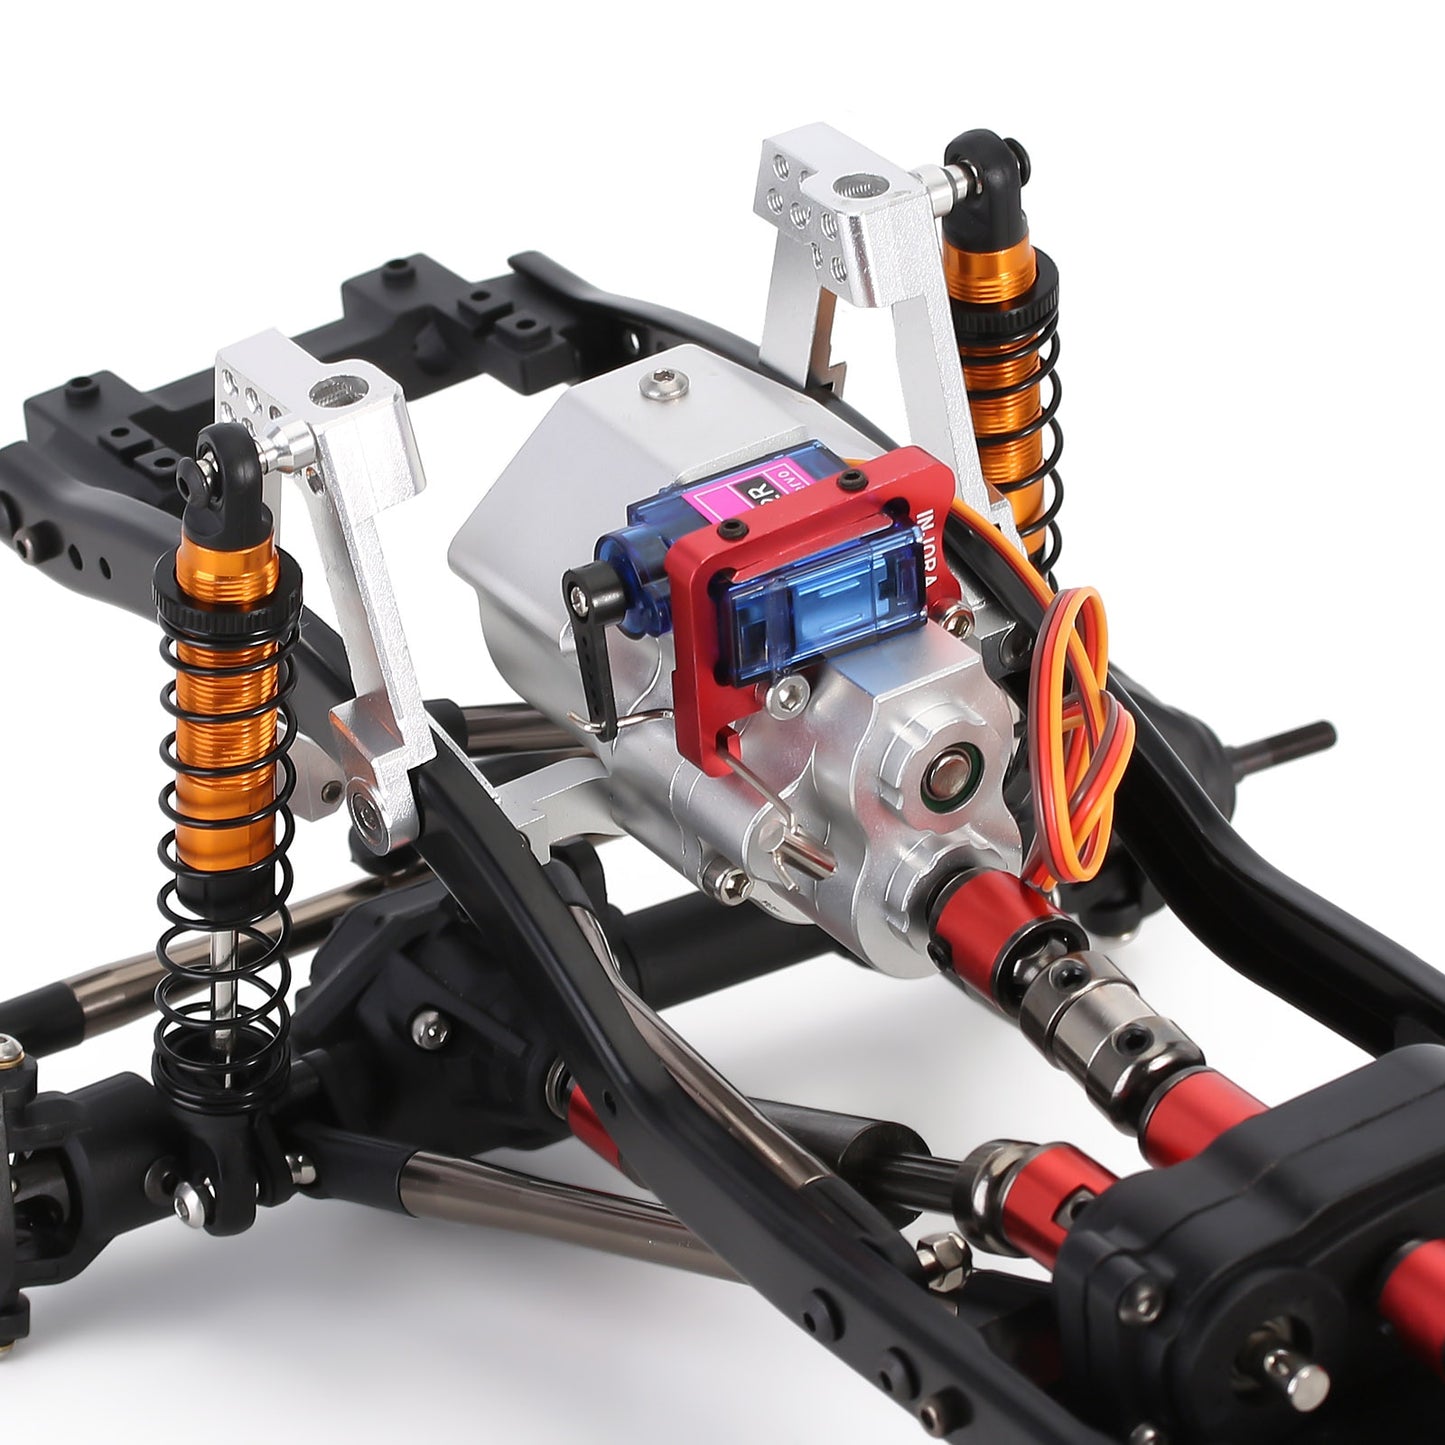 INJORA 313mm Wheelbase Metal Chassis Frame with Prefixal Single / 2-Speed Transmission for 1/10 RC Crawler Car Axial SCX10 90046